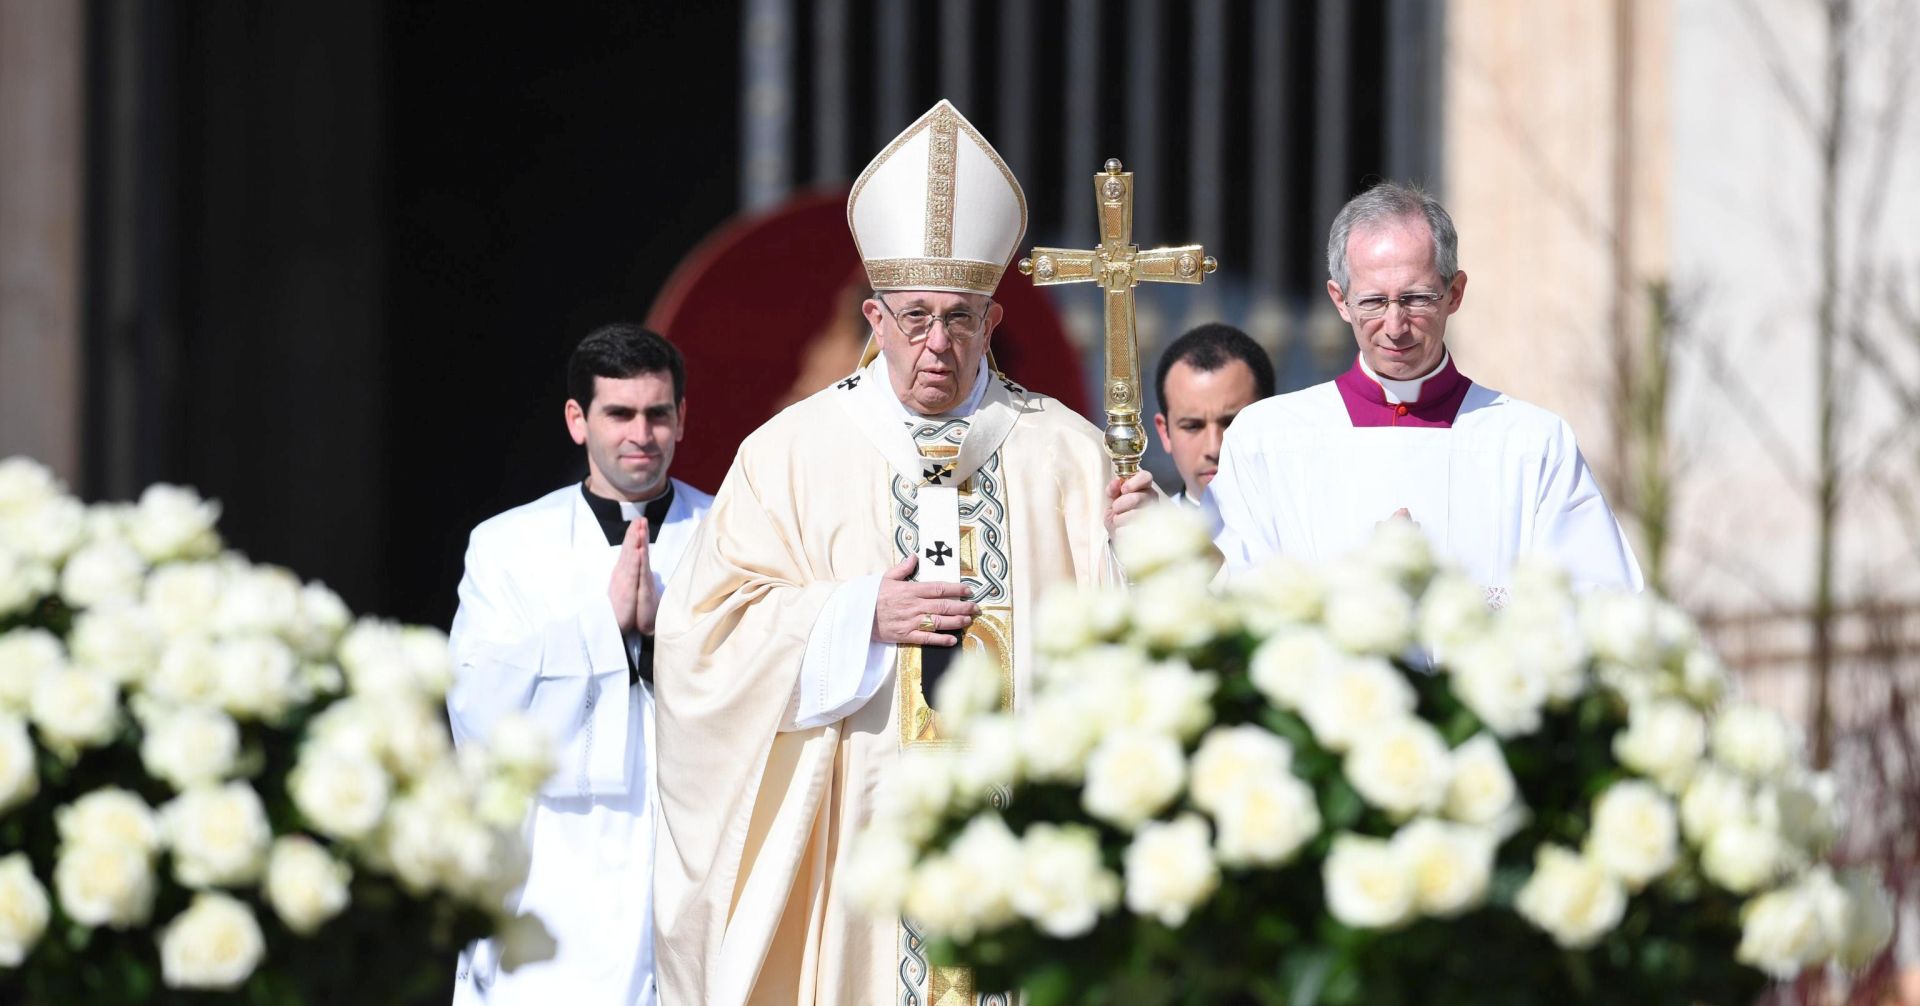 epa06639953 Pope Francis (C)arrives for the Easter Sunday mass on Saint Peter's square in the Vatican City, Vatican, 01 April 2018. Easter is celebrated around the world by Christians to mark the resurrection of Jesus Christ from the dead and the foundation of the Christian faith.  EPA/ALESSANDRO DI MEO